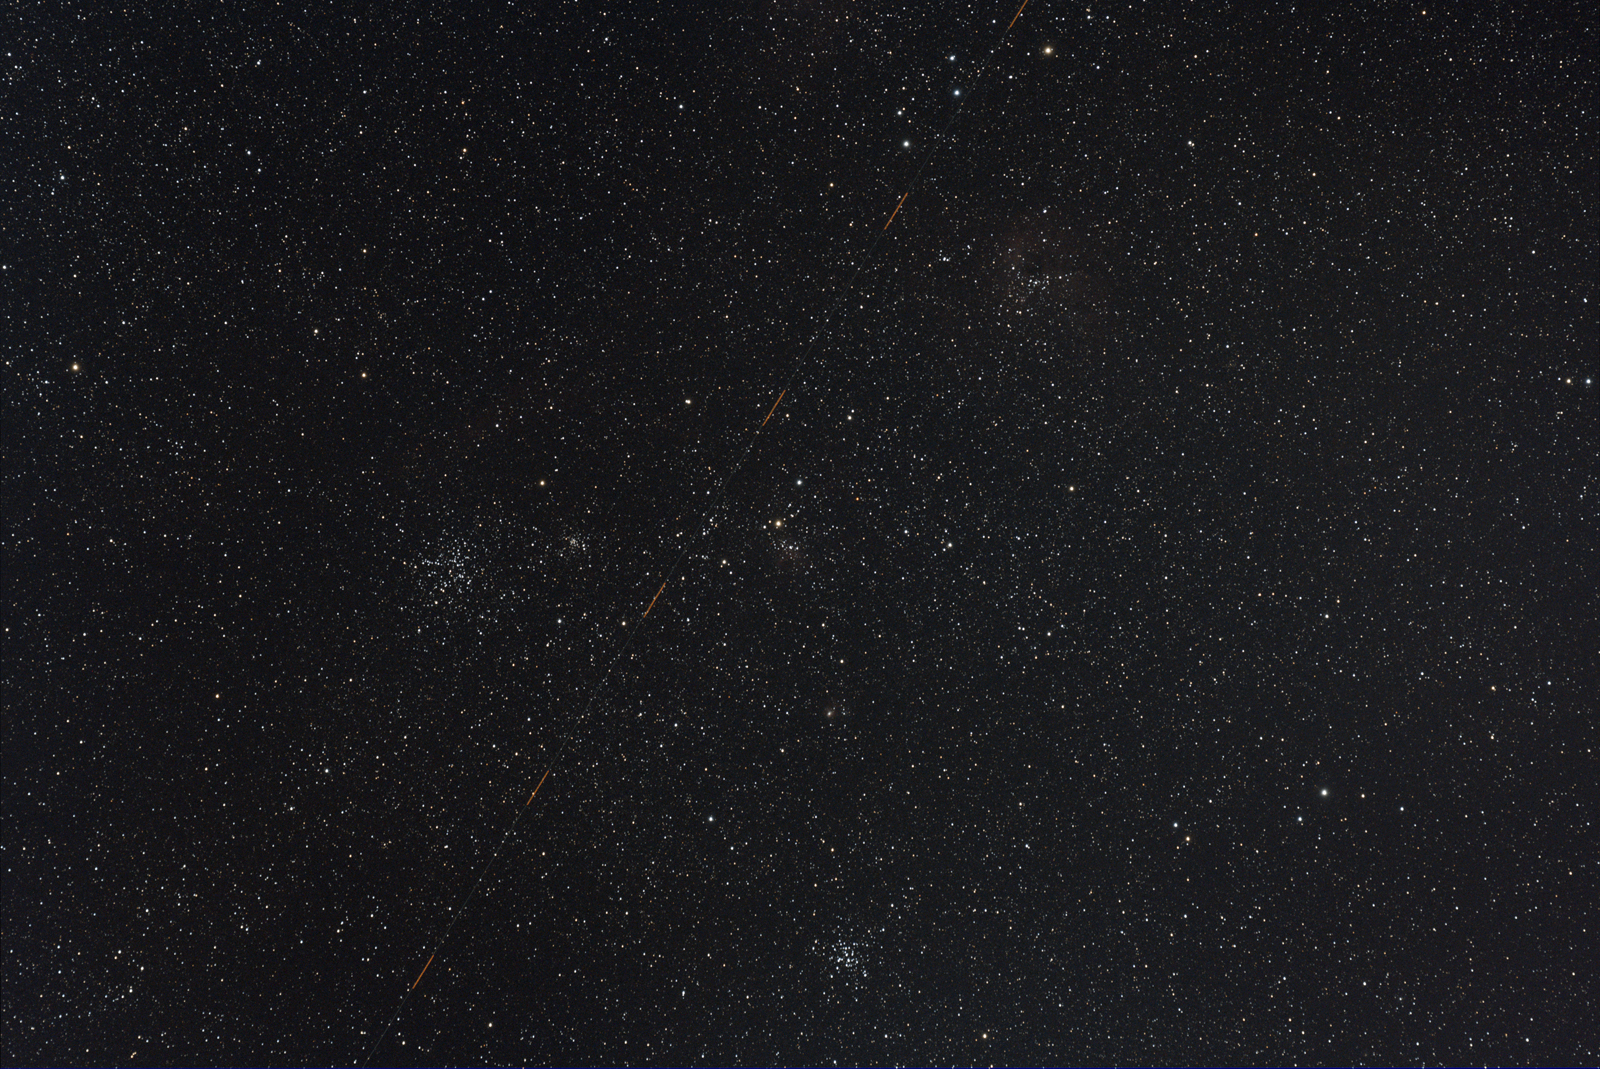 M36 M38 Auriga WF acl200 2600 g120 br10 nofilter 21F 1260S NoEdit 11222022m